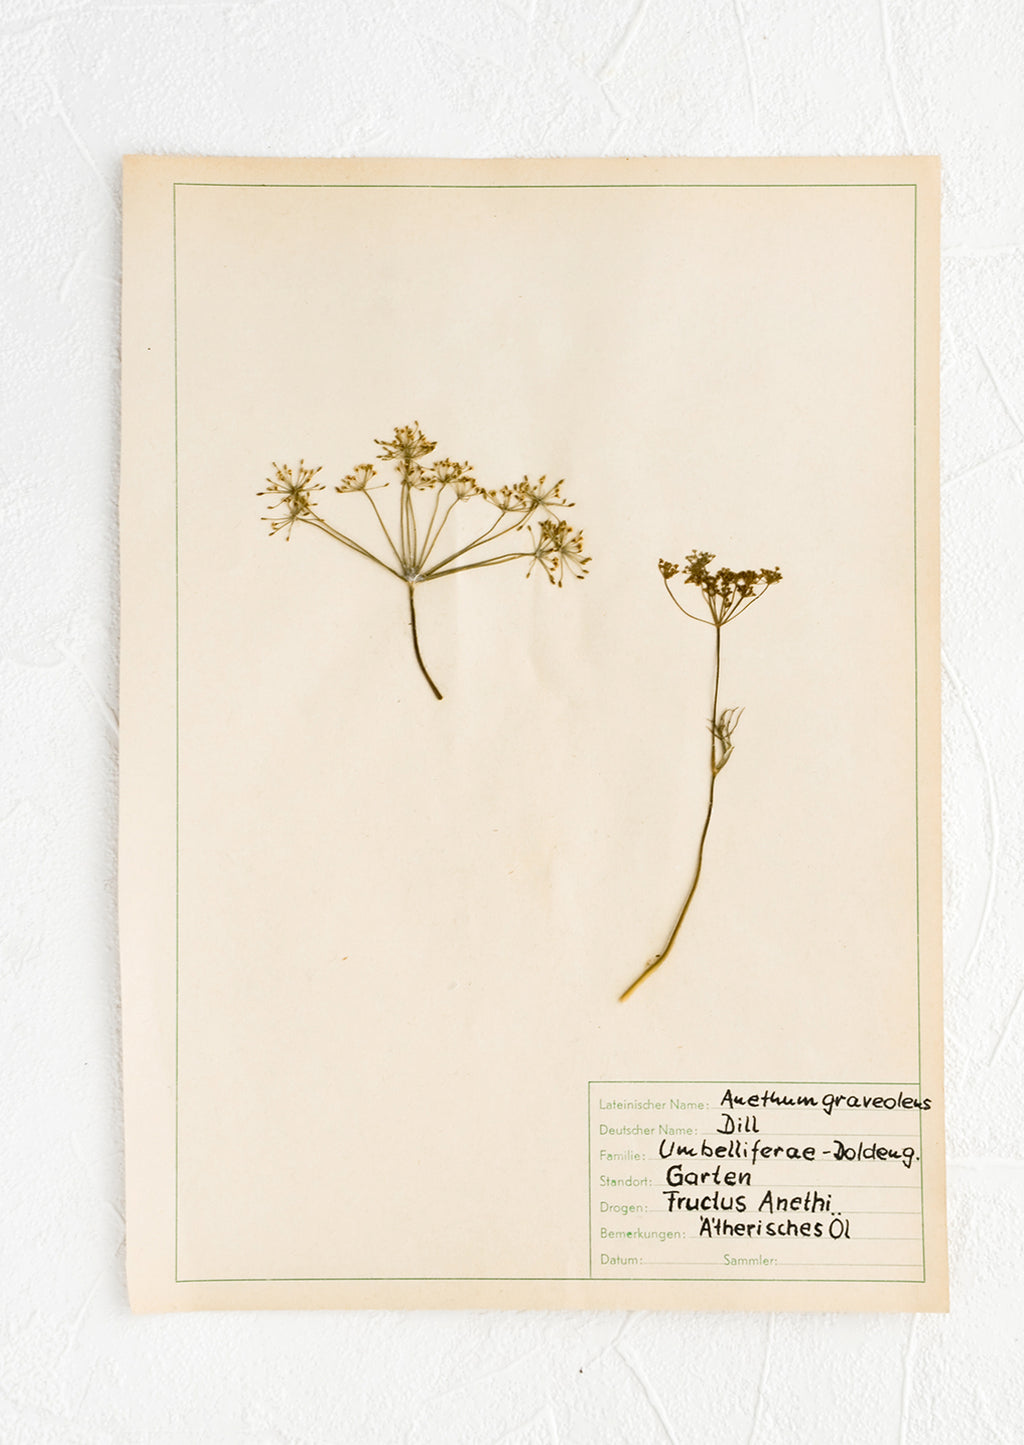 1: Dried dill specimen preserved on paper, intended for use as artwork